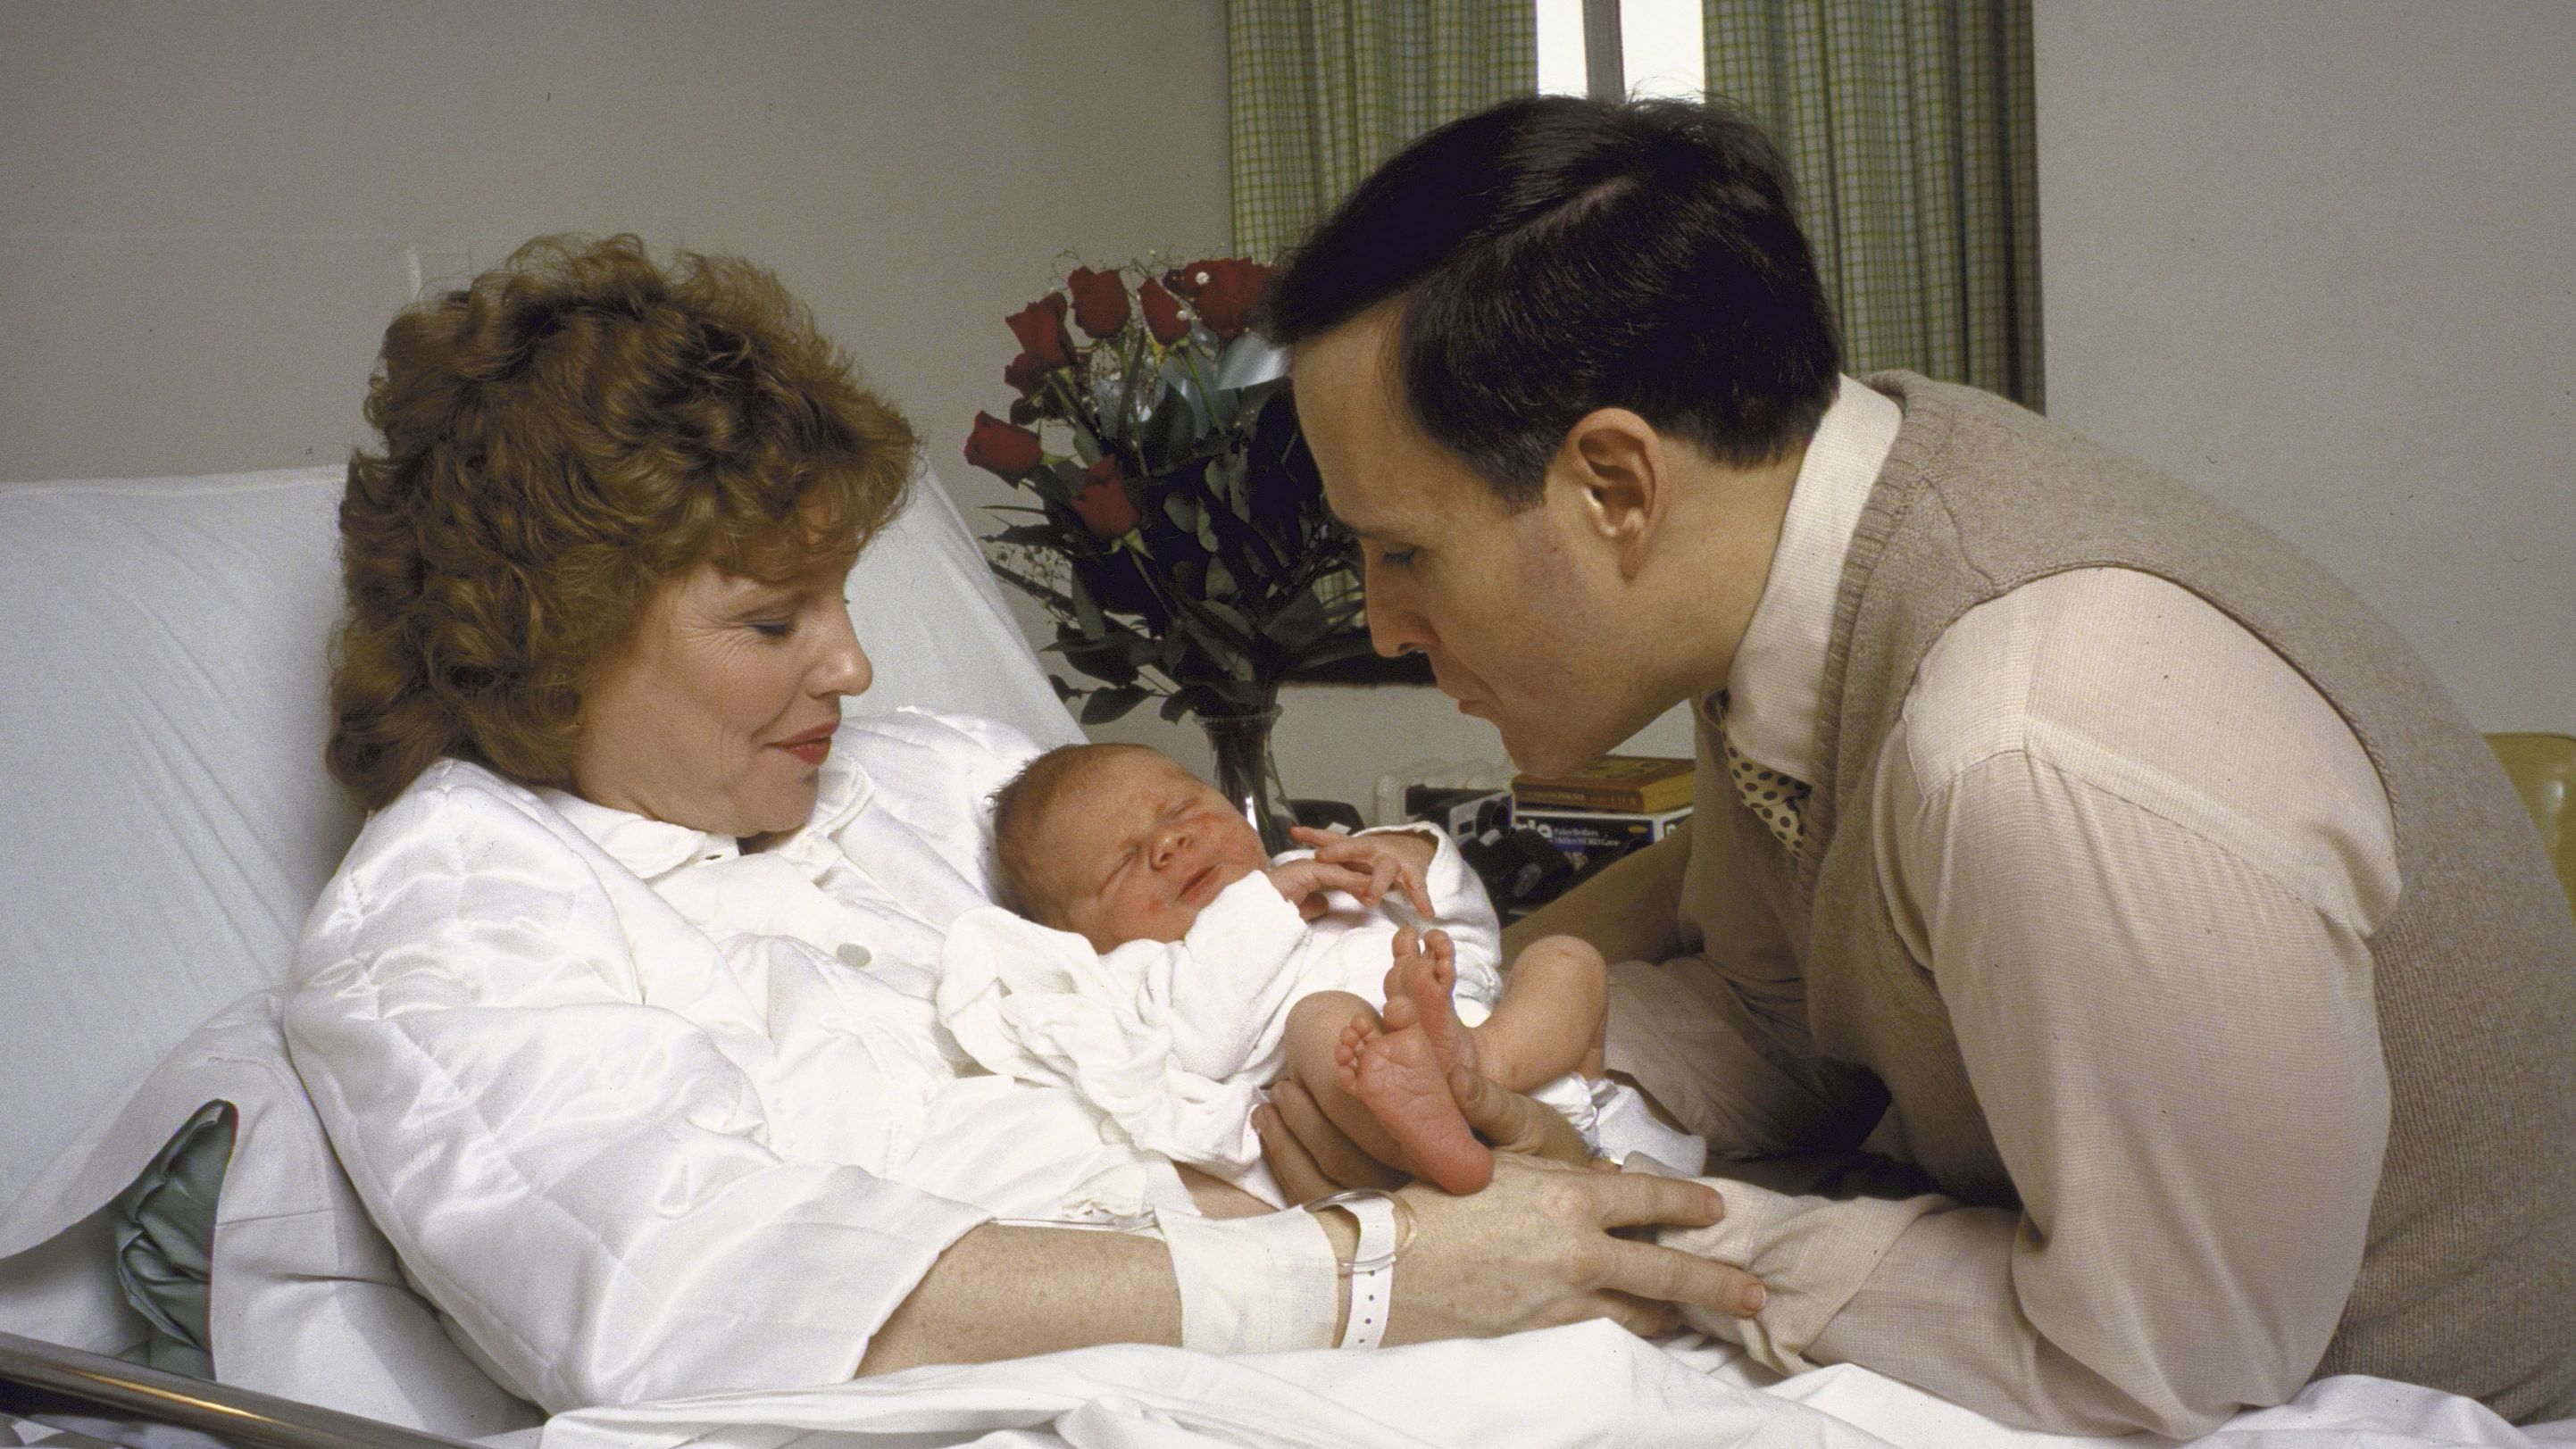 Giuliani and his second wife, Donna, hold their newborn son Andrew in 1986. At the time, Giuliani was US attorney for the Southern District of New York. Before that, he was associate attorney general of the United States. That's the third-highest position in the Department of Justice.